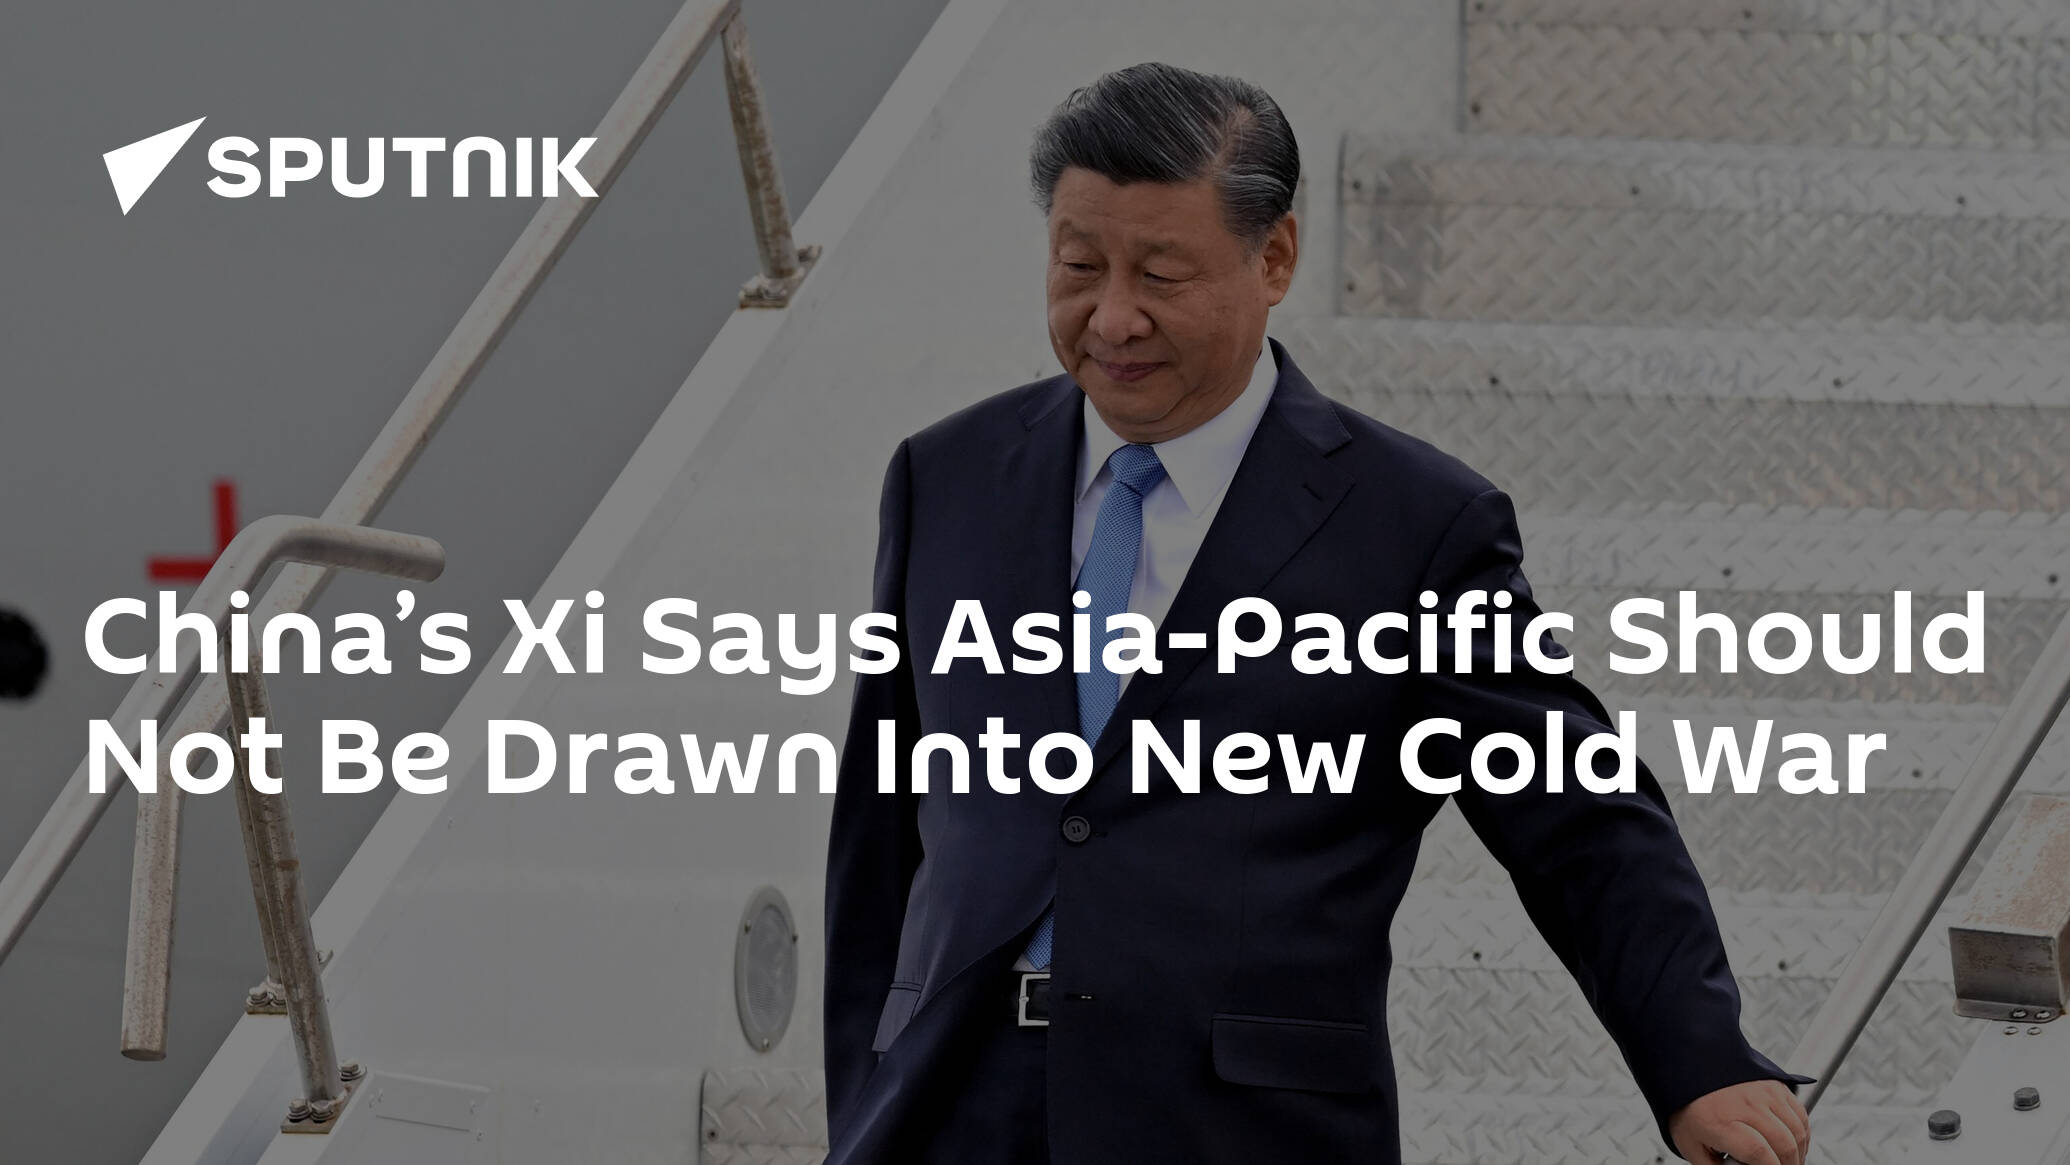 China’s Xi Says Asia-Pacific Should Not Be Drawn Into New Cold War